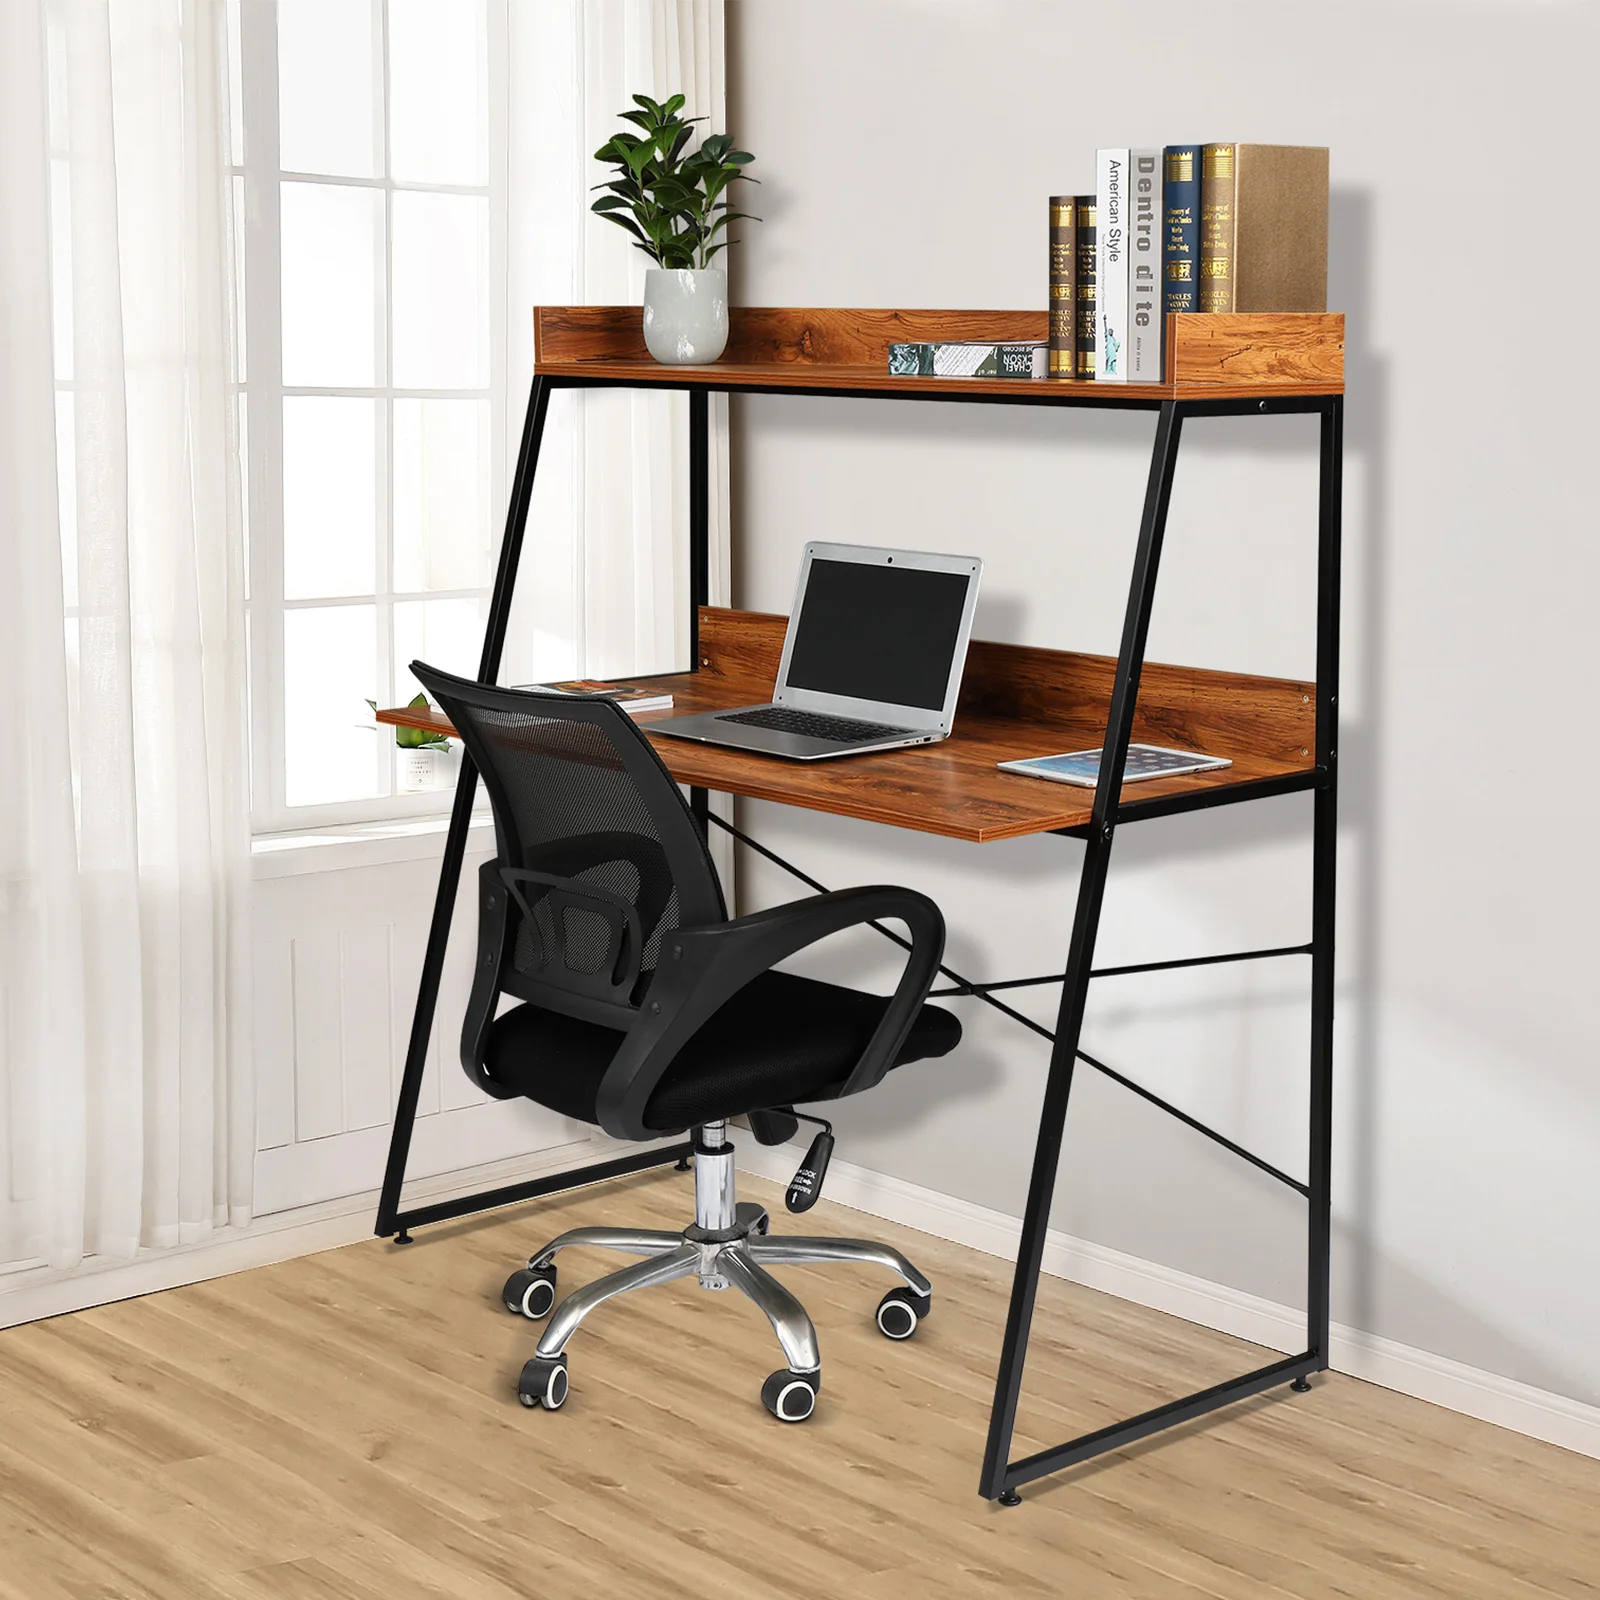 

120cm Vintage Color Particleboard With Triamine On The Table With Shelf Layer Computer Desk Space-Saving Multifunctional Desk